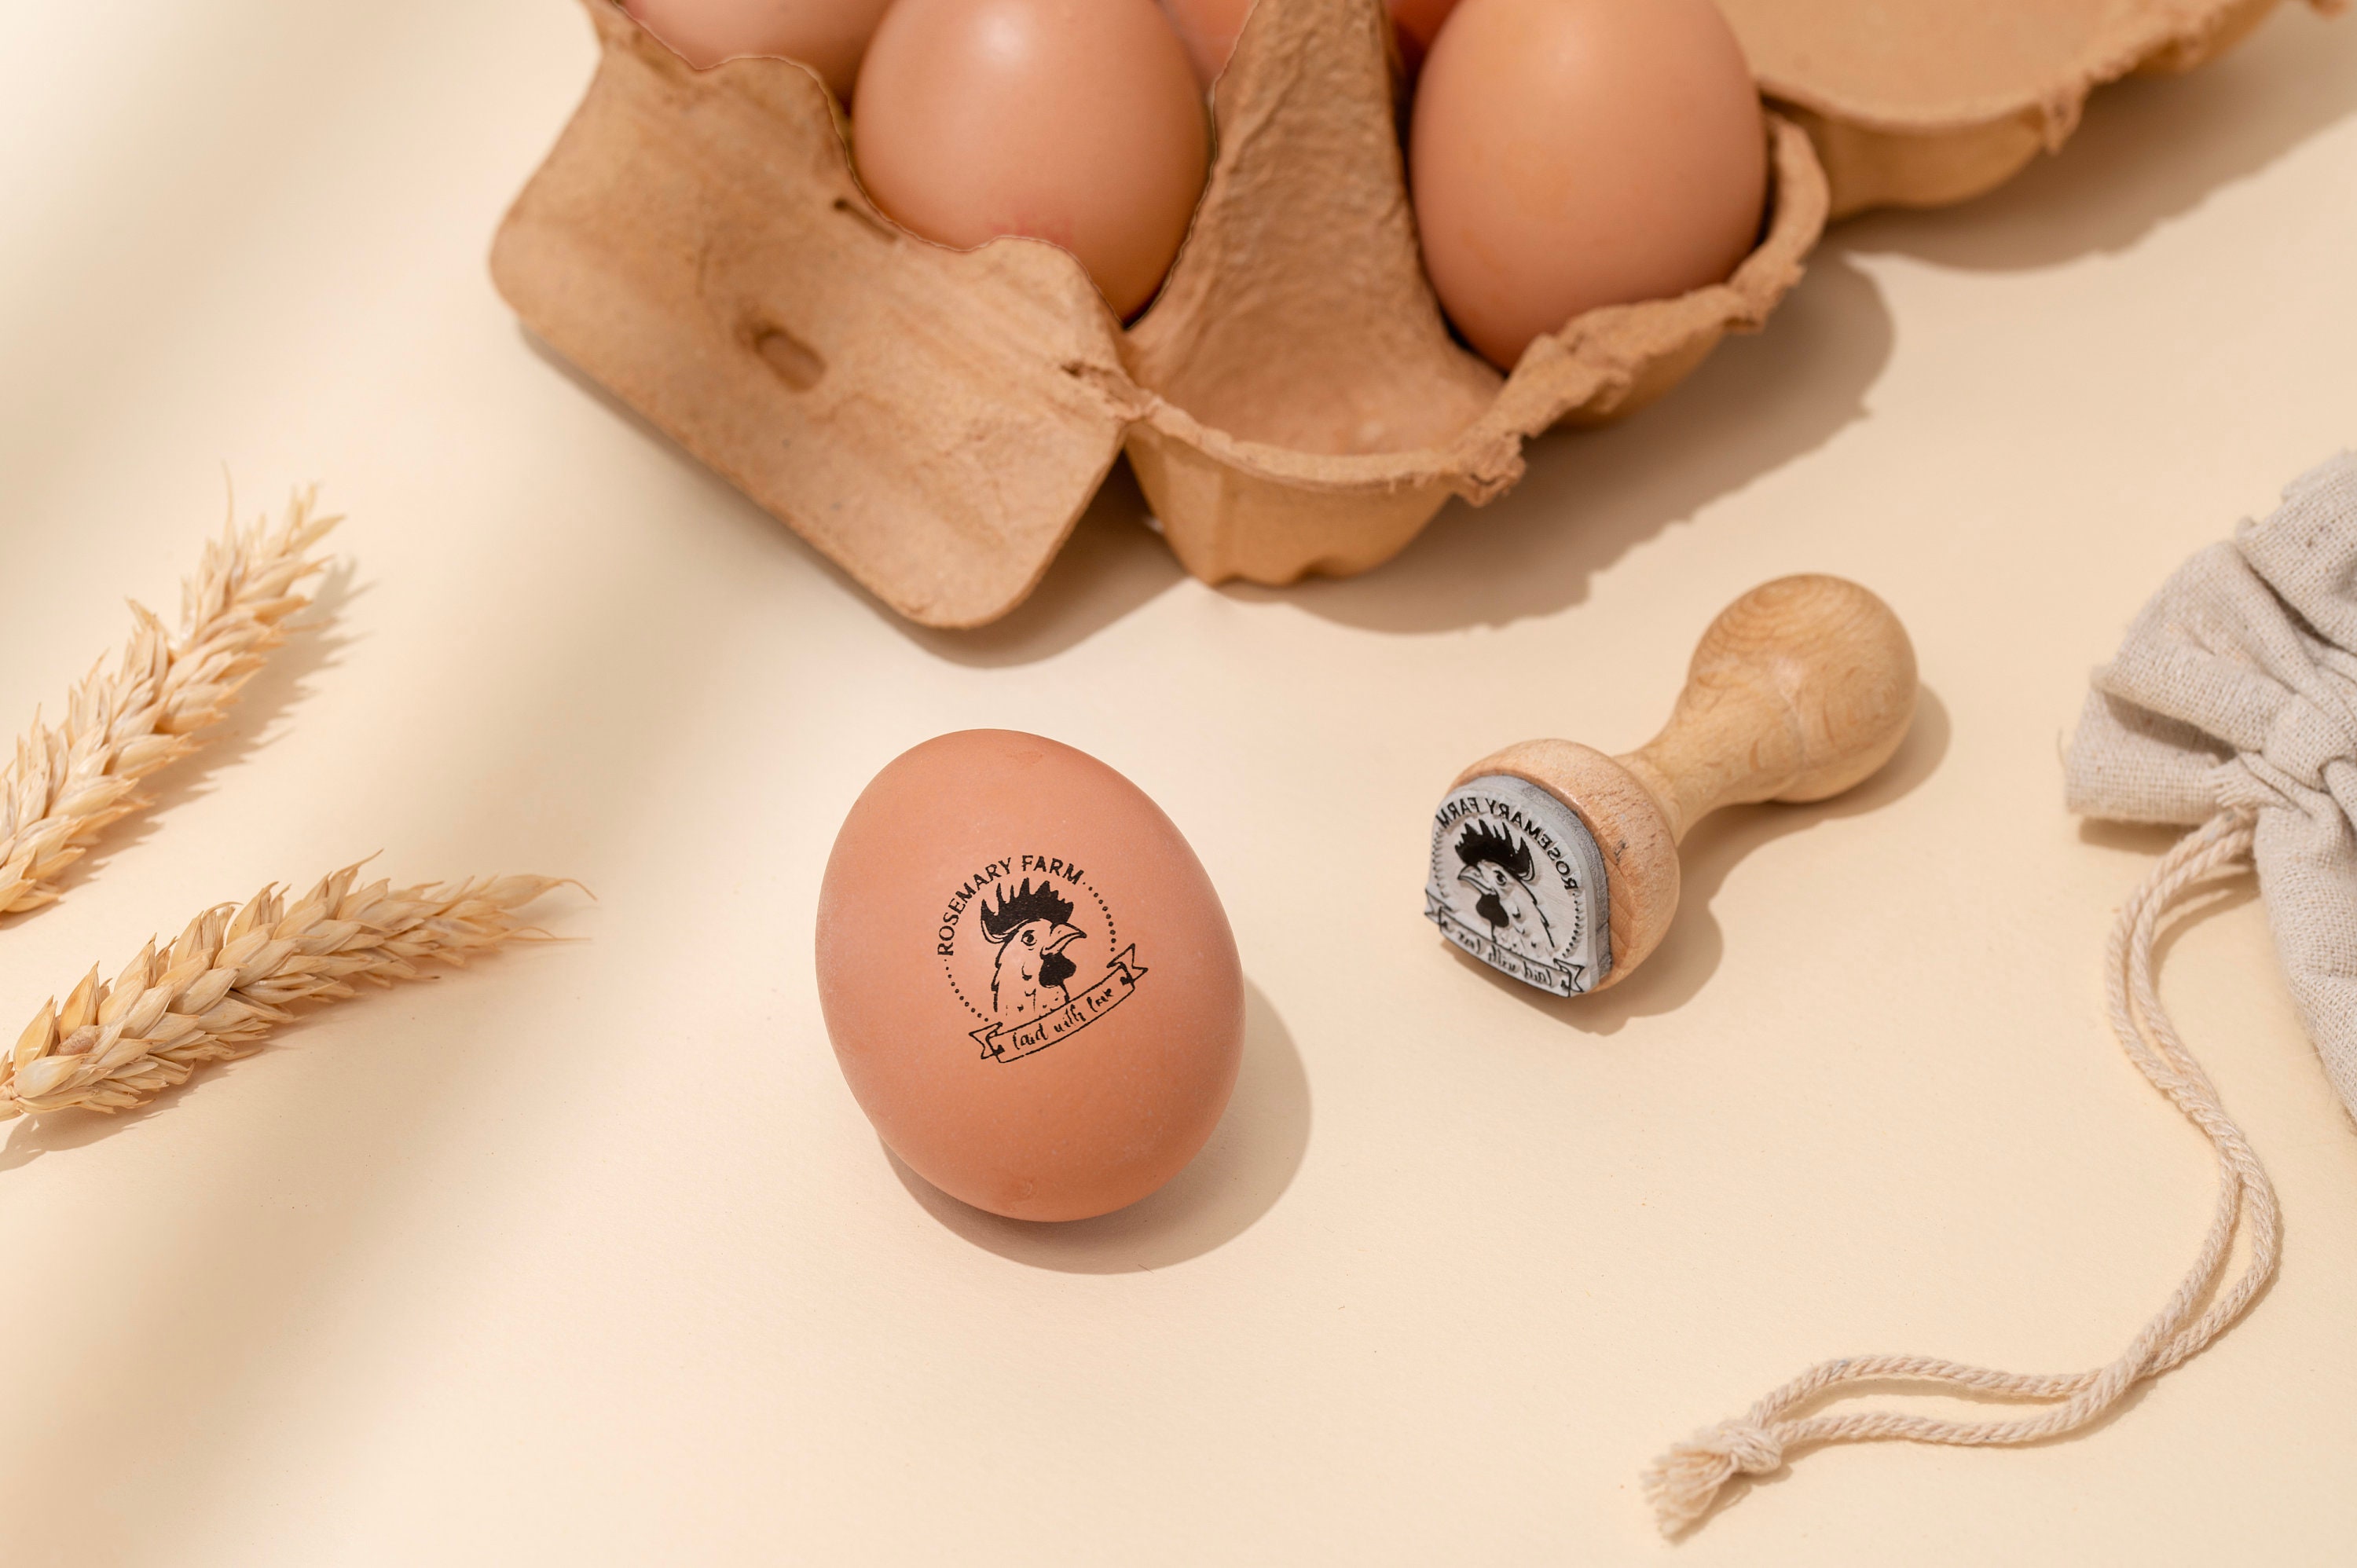  AHANDMAKER 5 Styles Egg Stamps, Egg Rubber Stamp for Fresh Eggs  DIY Mini Egg Stamp, Style 2 Egg Drawing Stamps Chicken Egg Stamps : Arts,  Crafts & Sewing